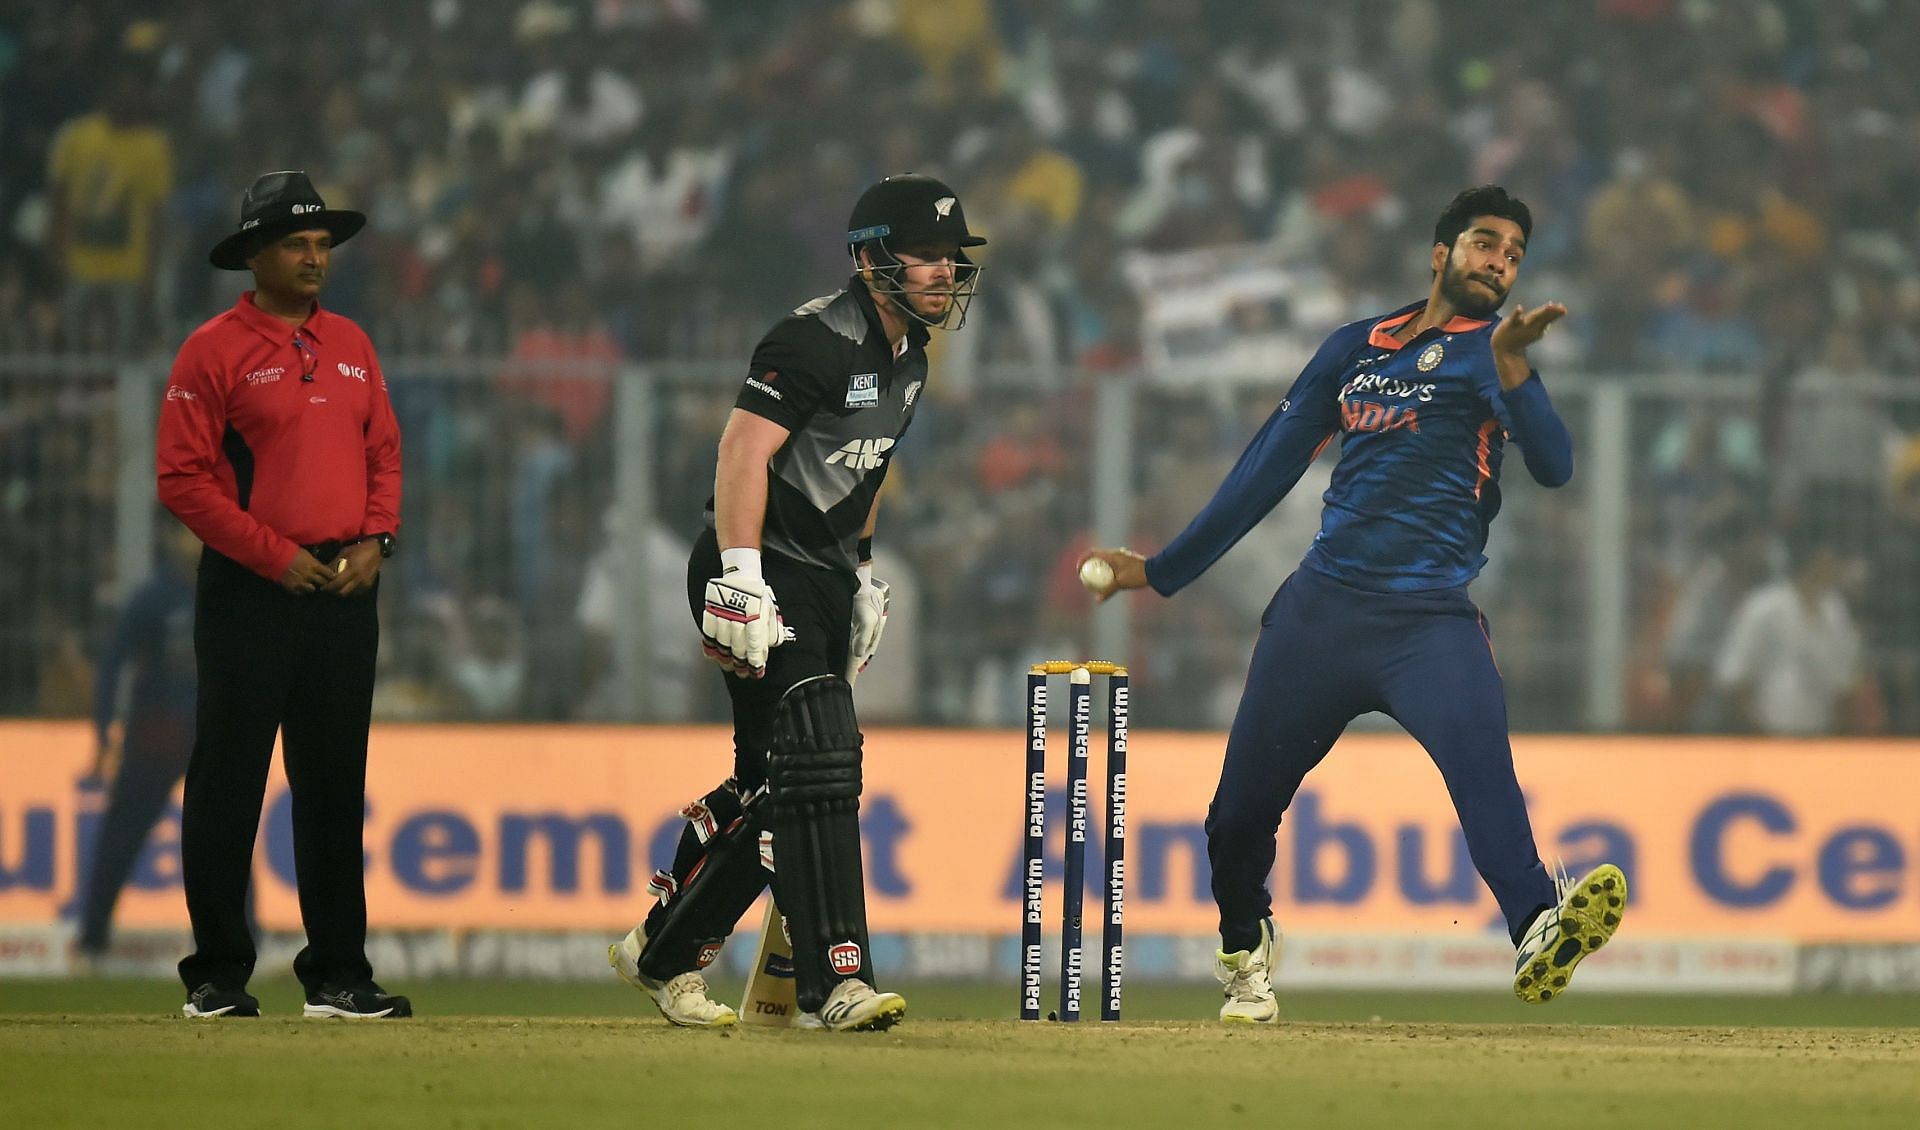 Venkatesh Iyer was given the ball in just one T20I against New Zealand as well